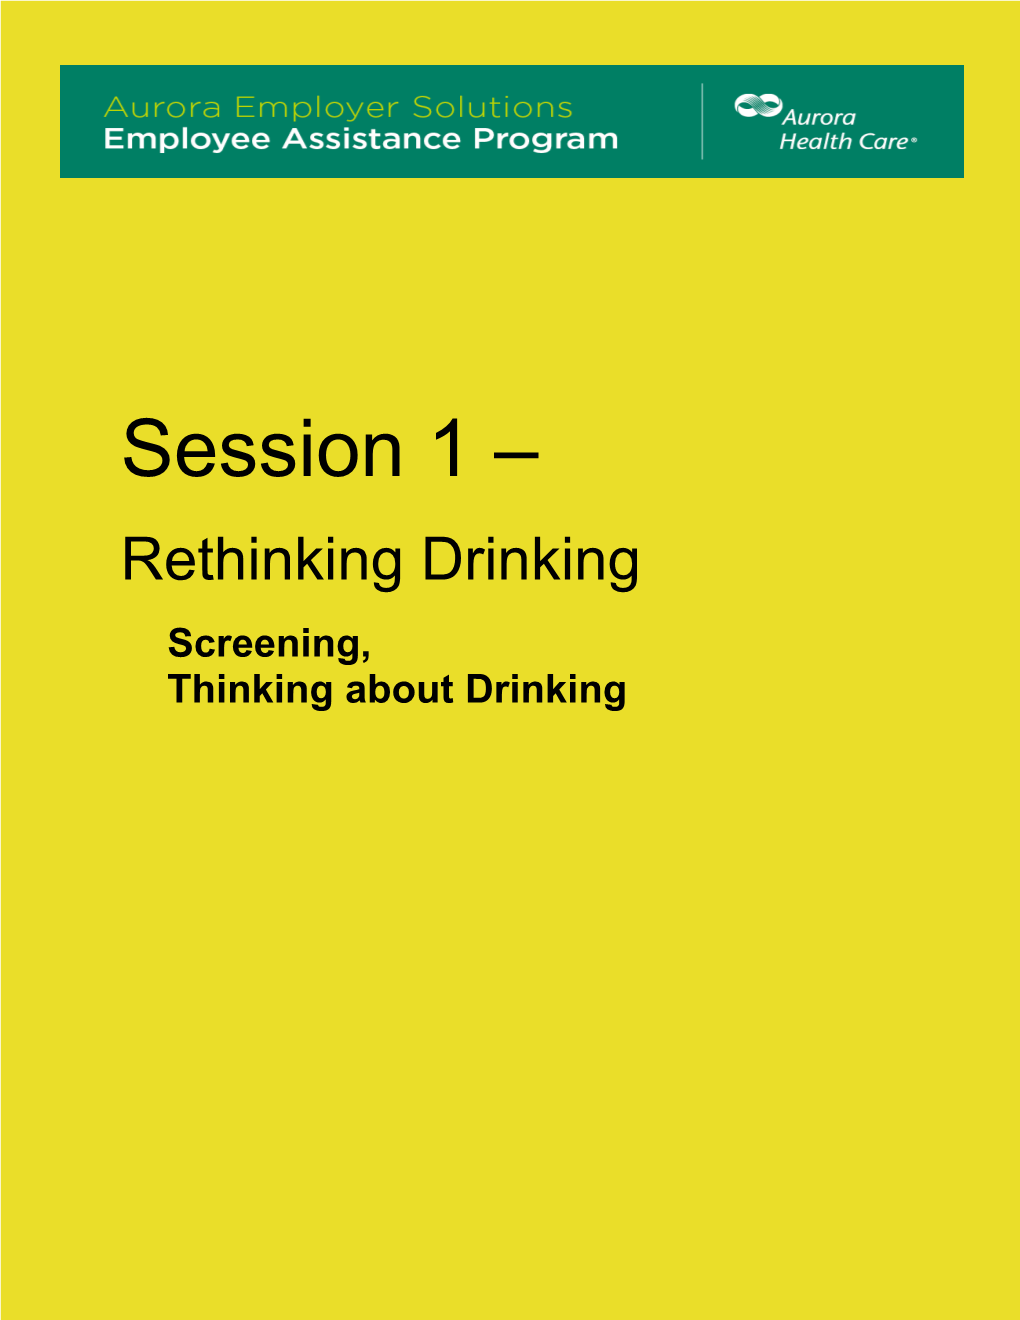 Session 1 – Rethinking Drinking Screening, Thinking About Drinking